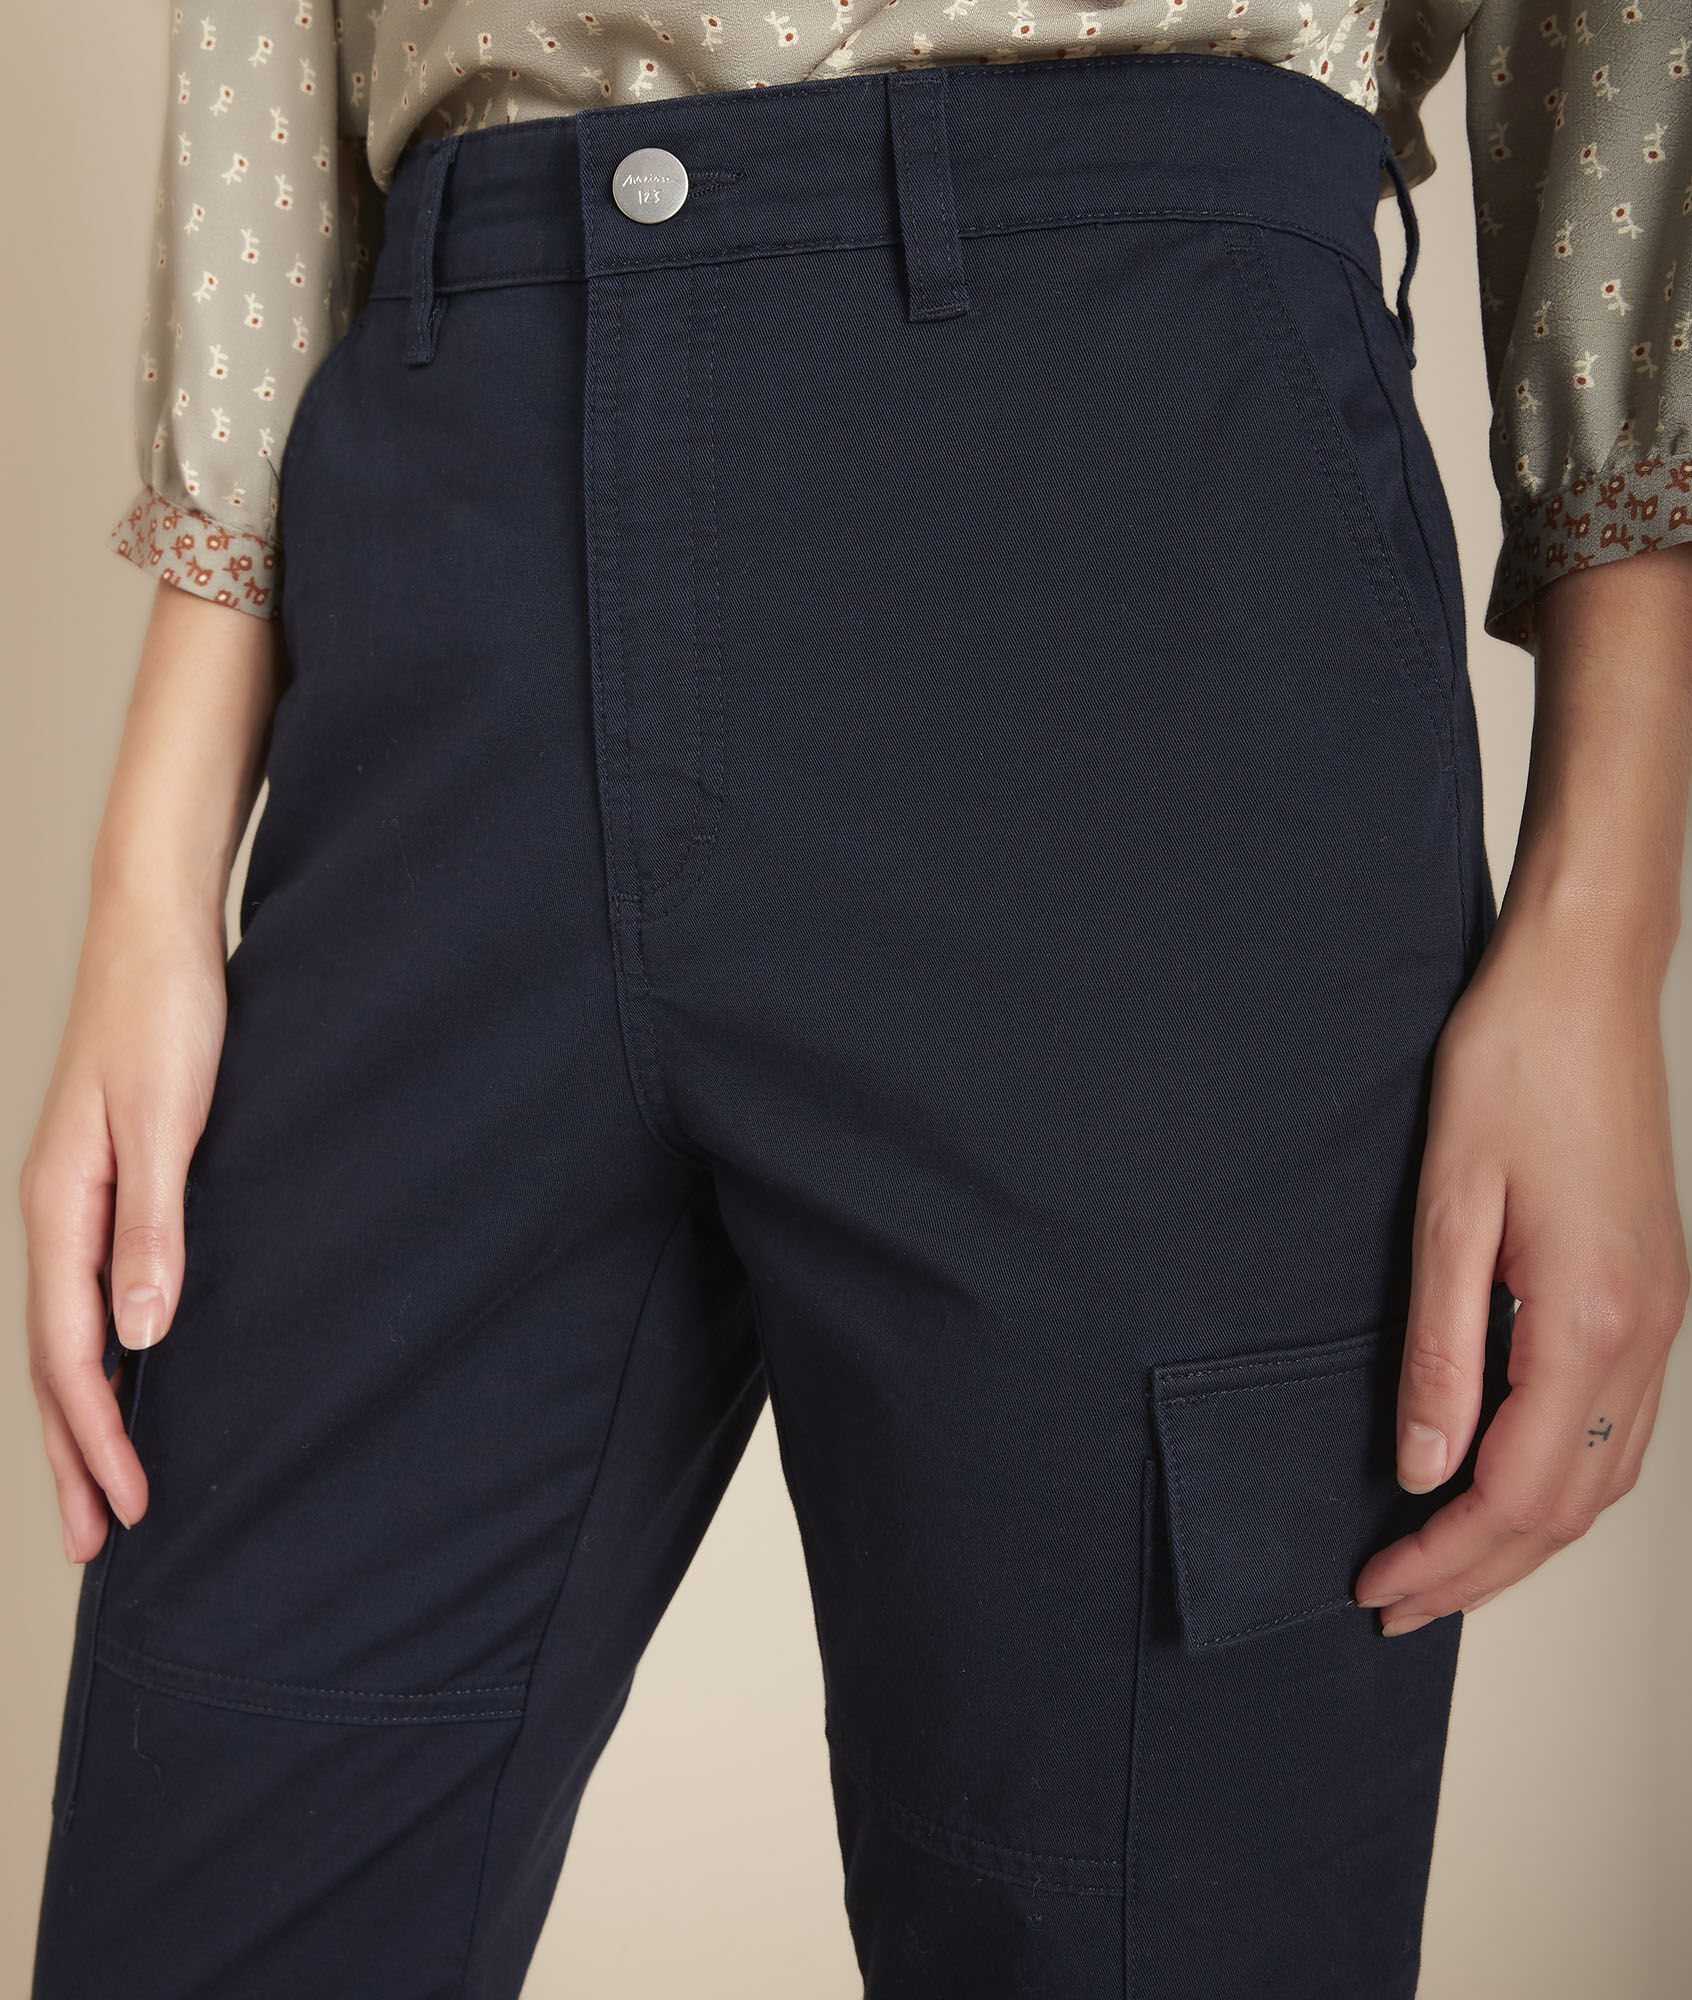 womens navy cargo trousers